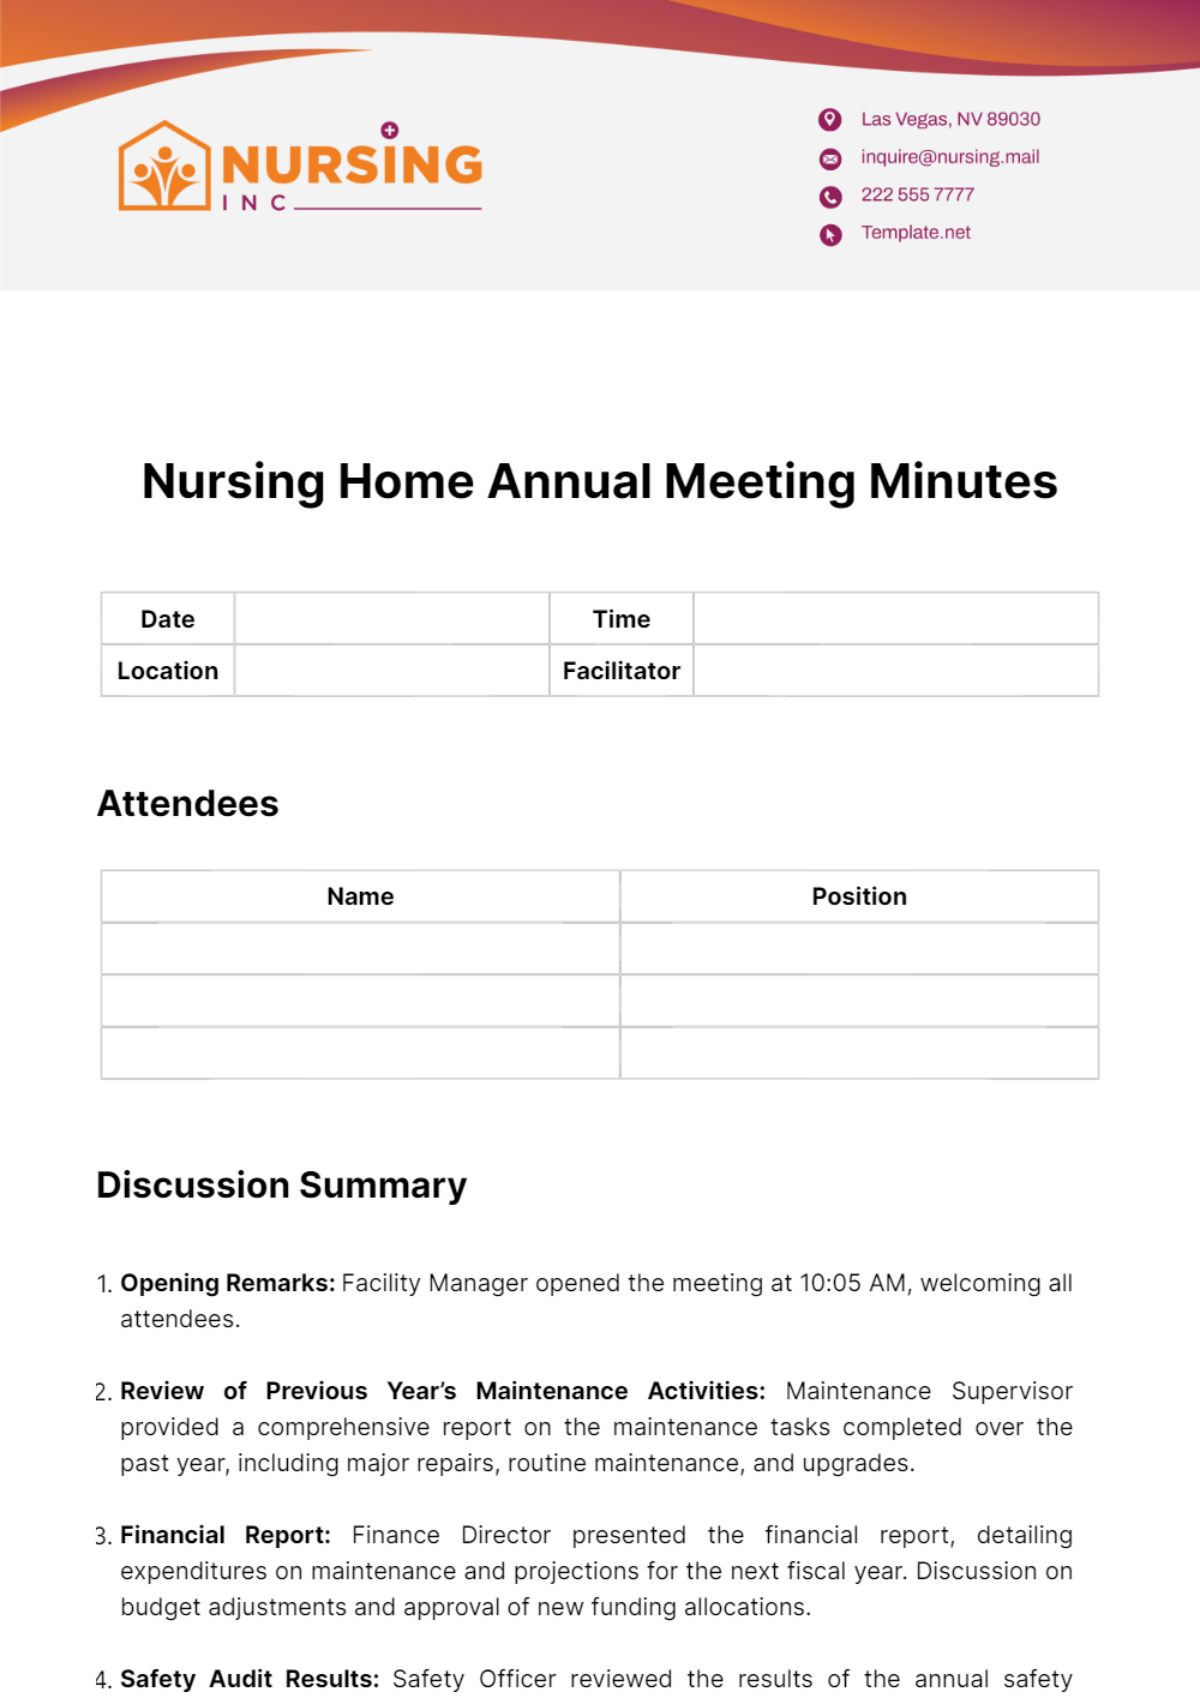 Free Nursing Home Annual Meeting Minutes Template